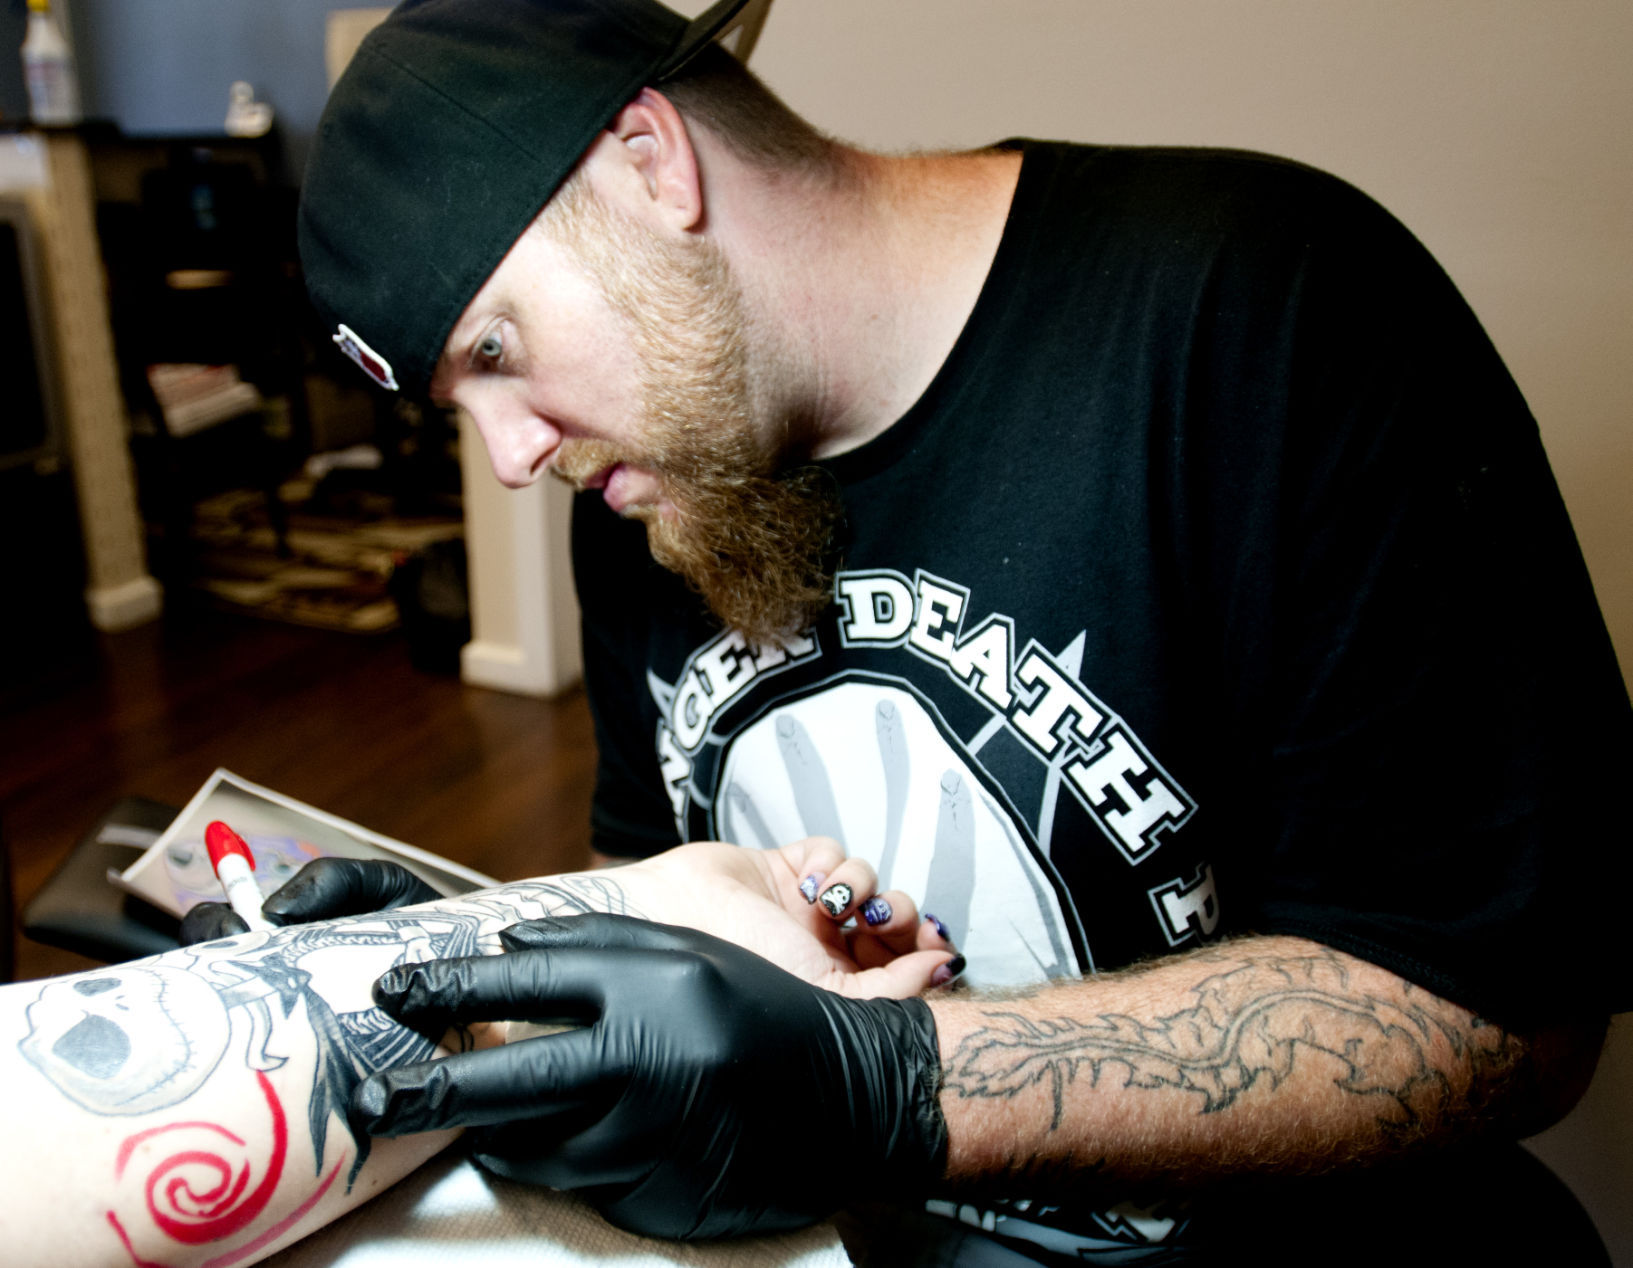 Ink for all: Local tattoo artists offer something for everyone | Allaccess  | hjnews.com